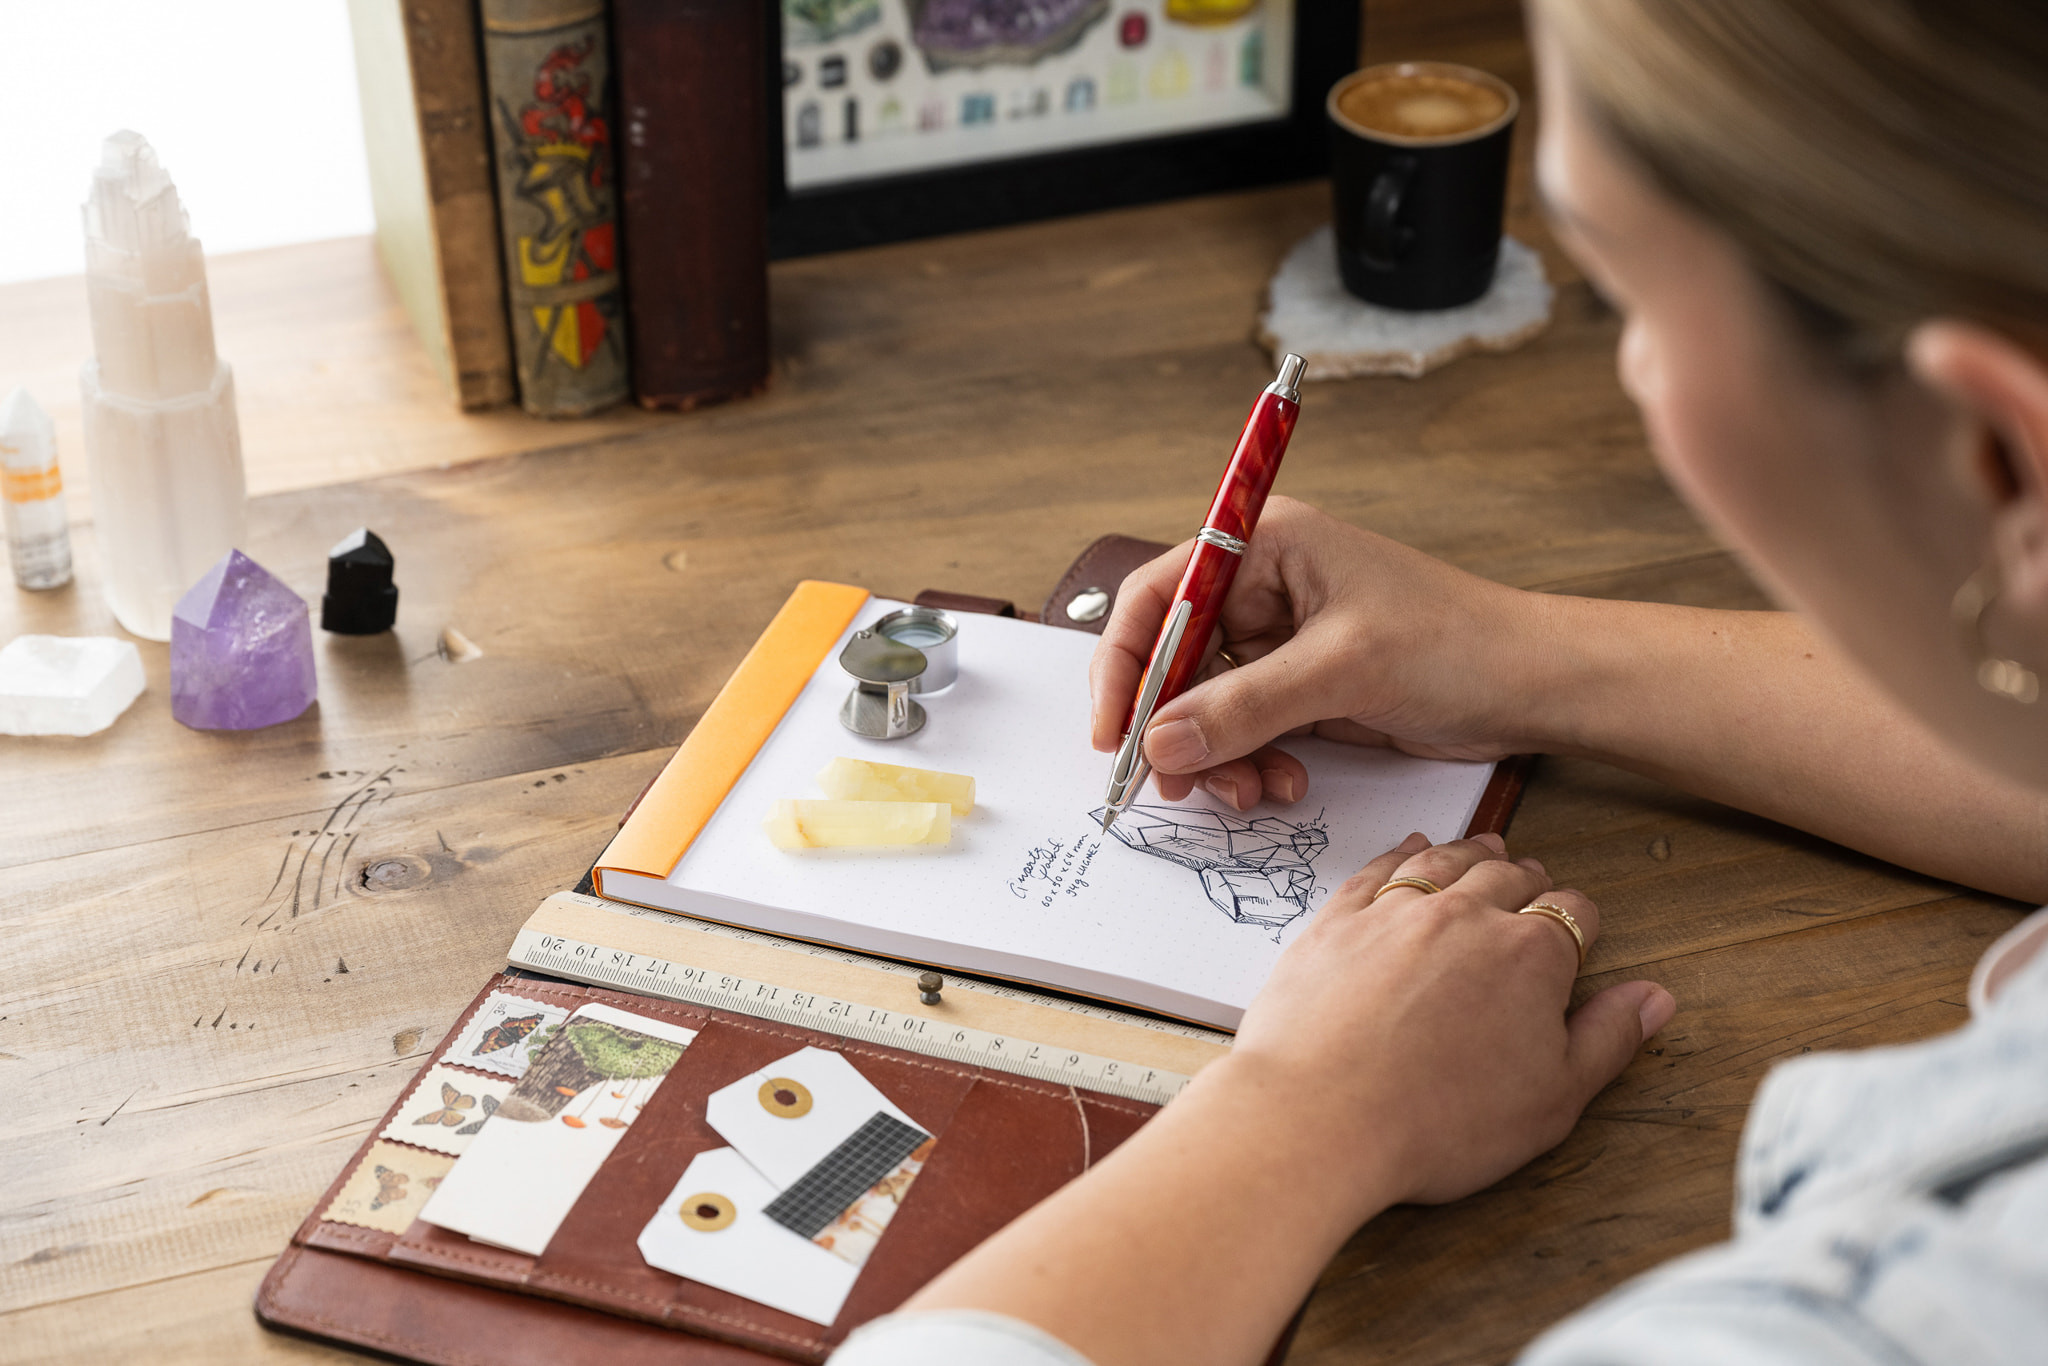 An artist labelling her sketch in a notebook in calligraphy using a Capless SE fountain pen, showcasing the versatility of fountain pens in creative work.